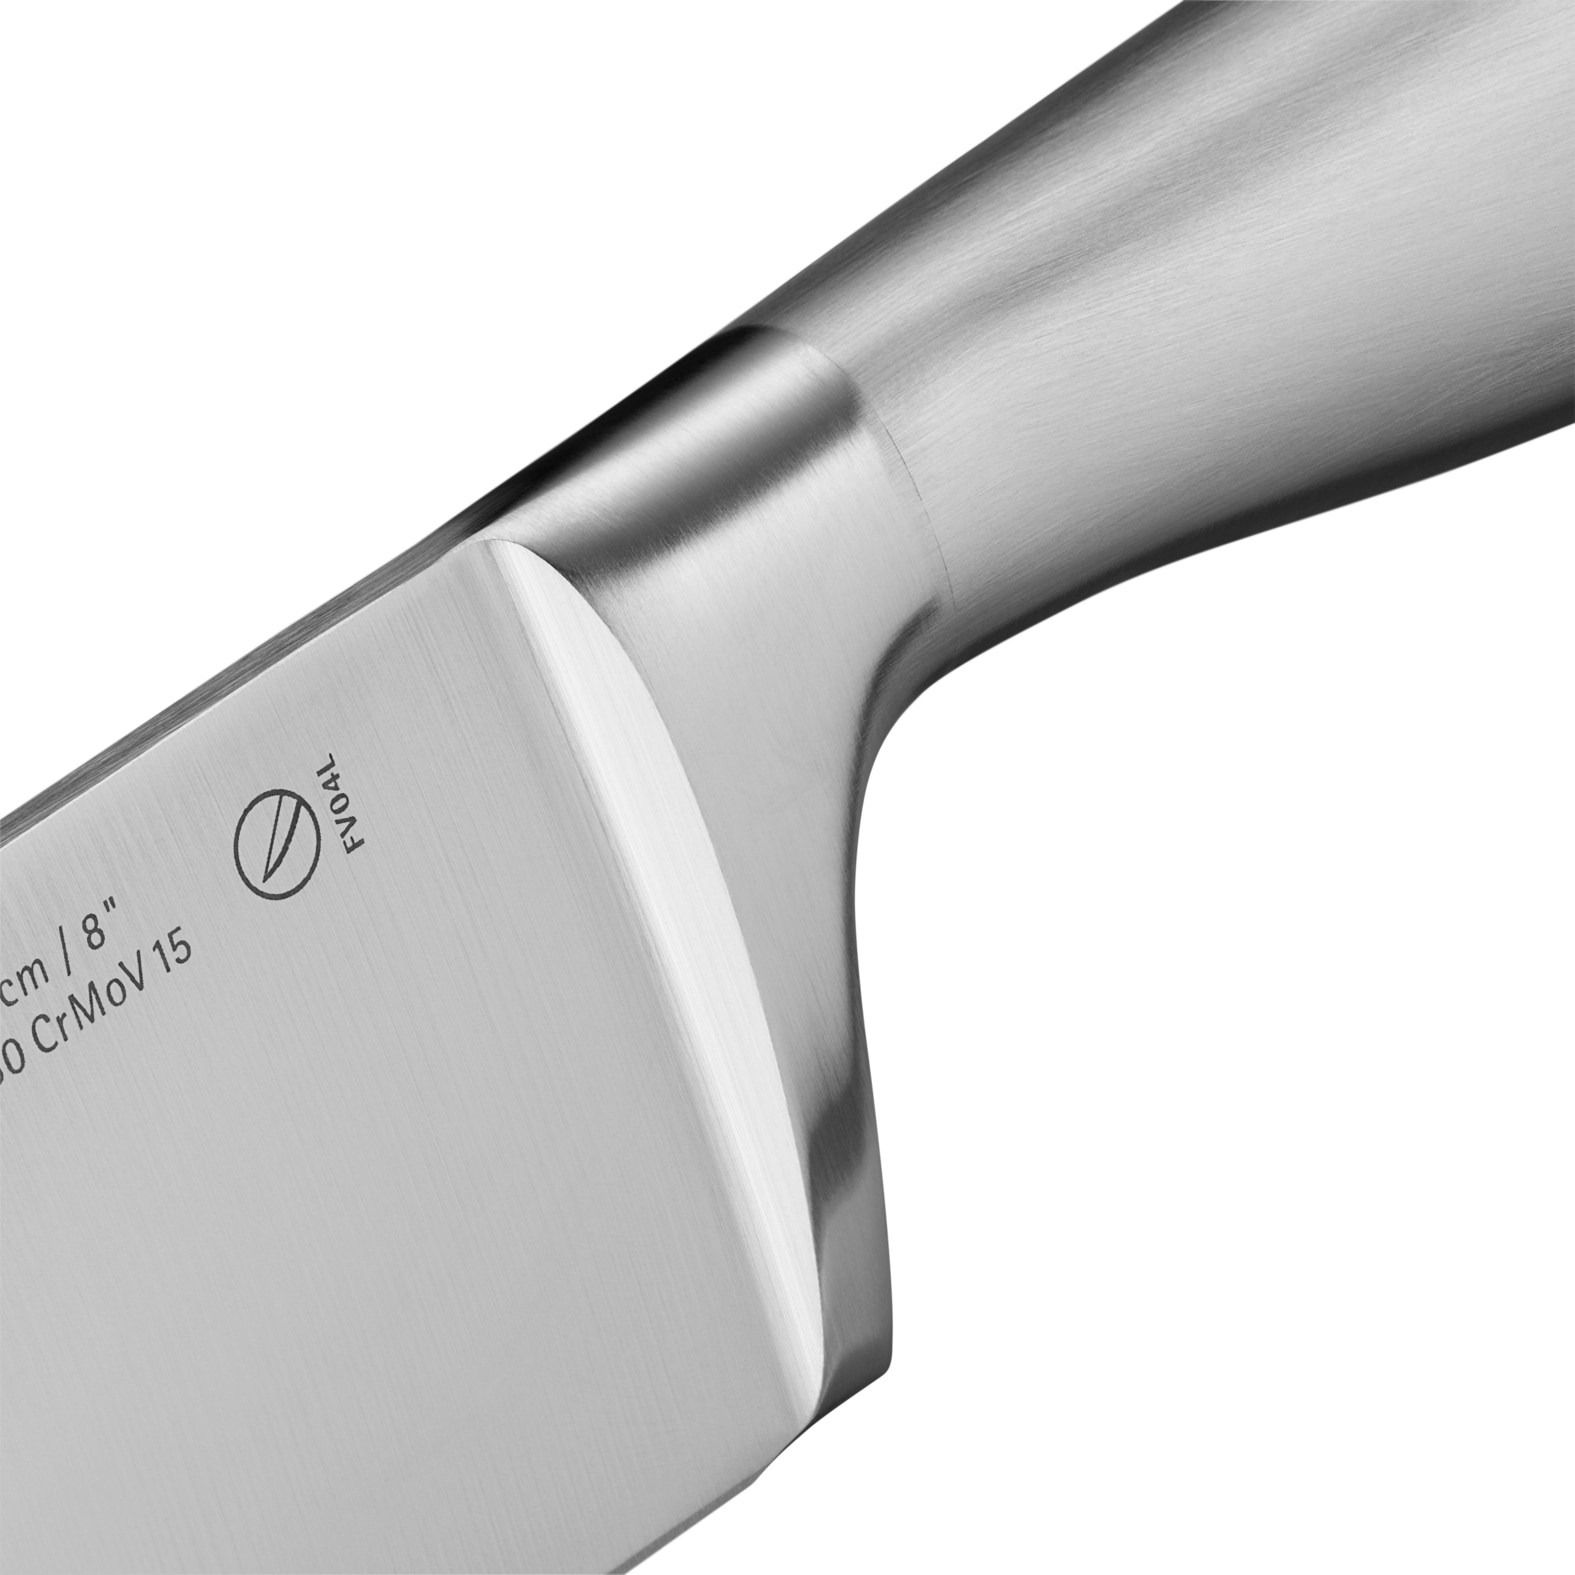 WMF Messer-Set »Grand Gourmet«, (Set, Made Germany 2 OTTO in online bei tlg.), Asia Messerset